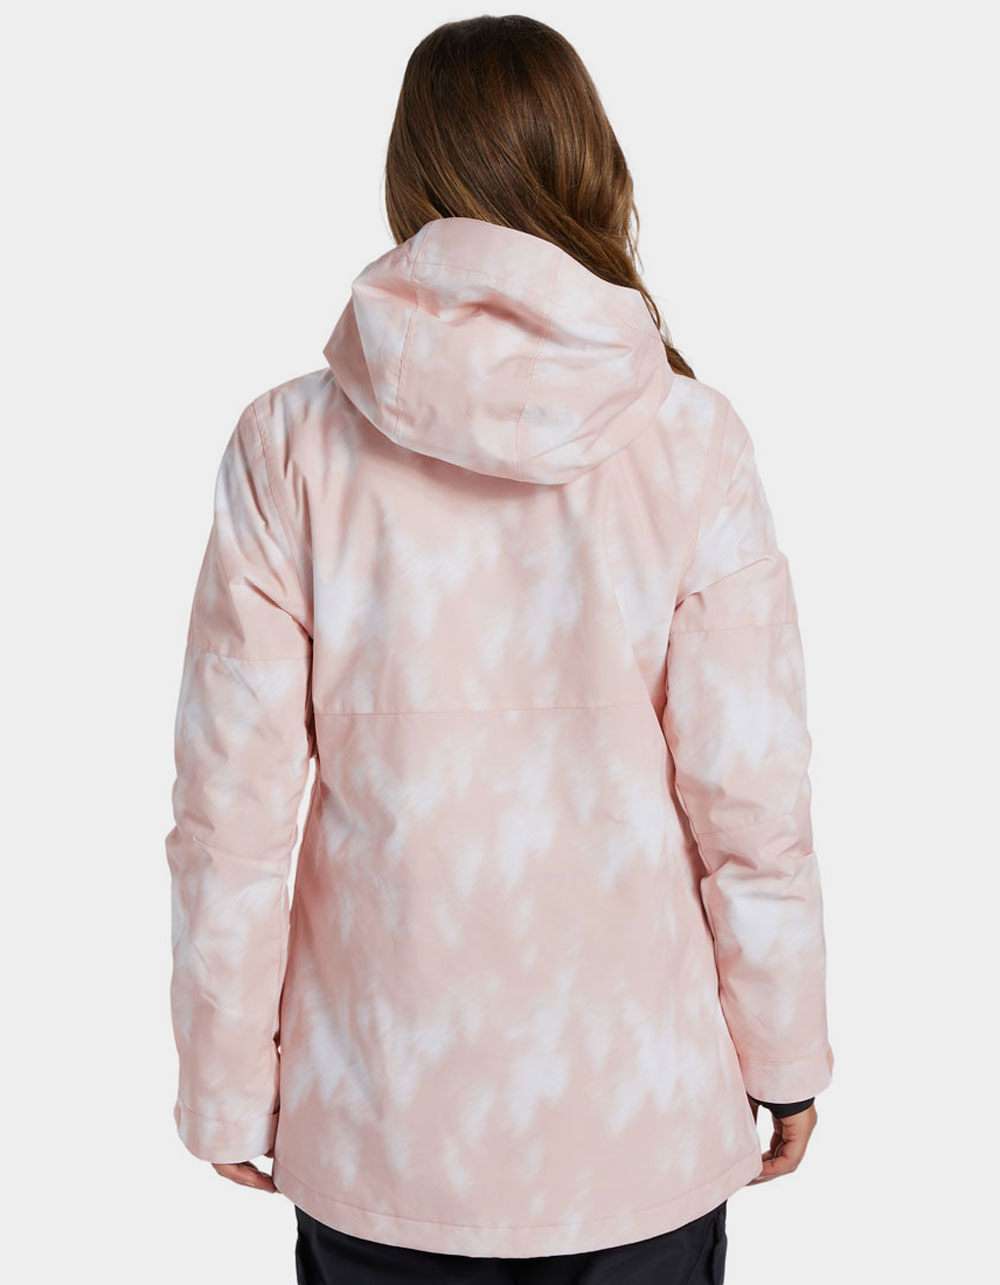 DC SHOES Cruiser Womens Snow Jacket - PINK